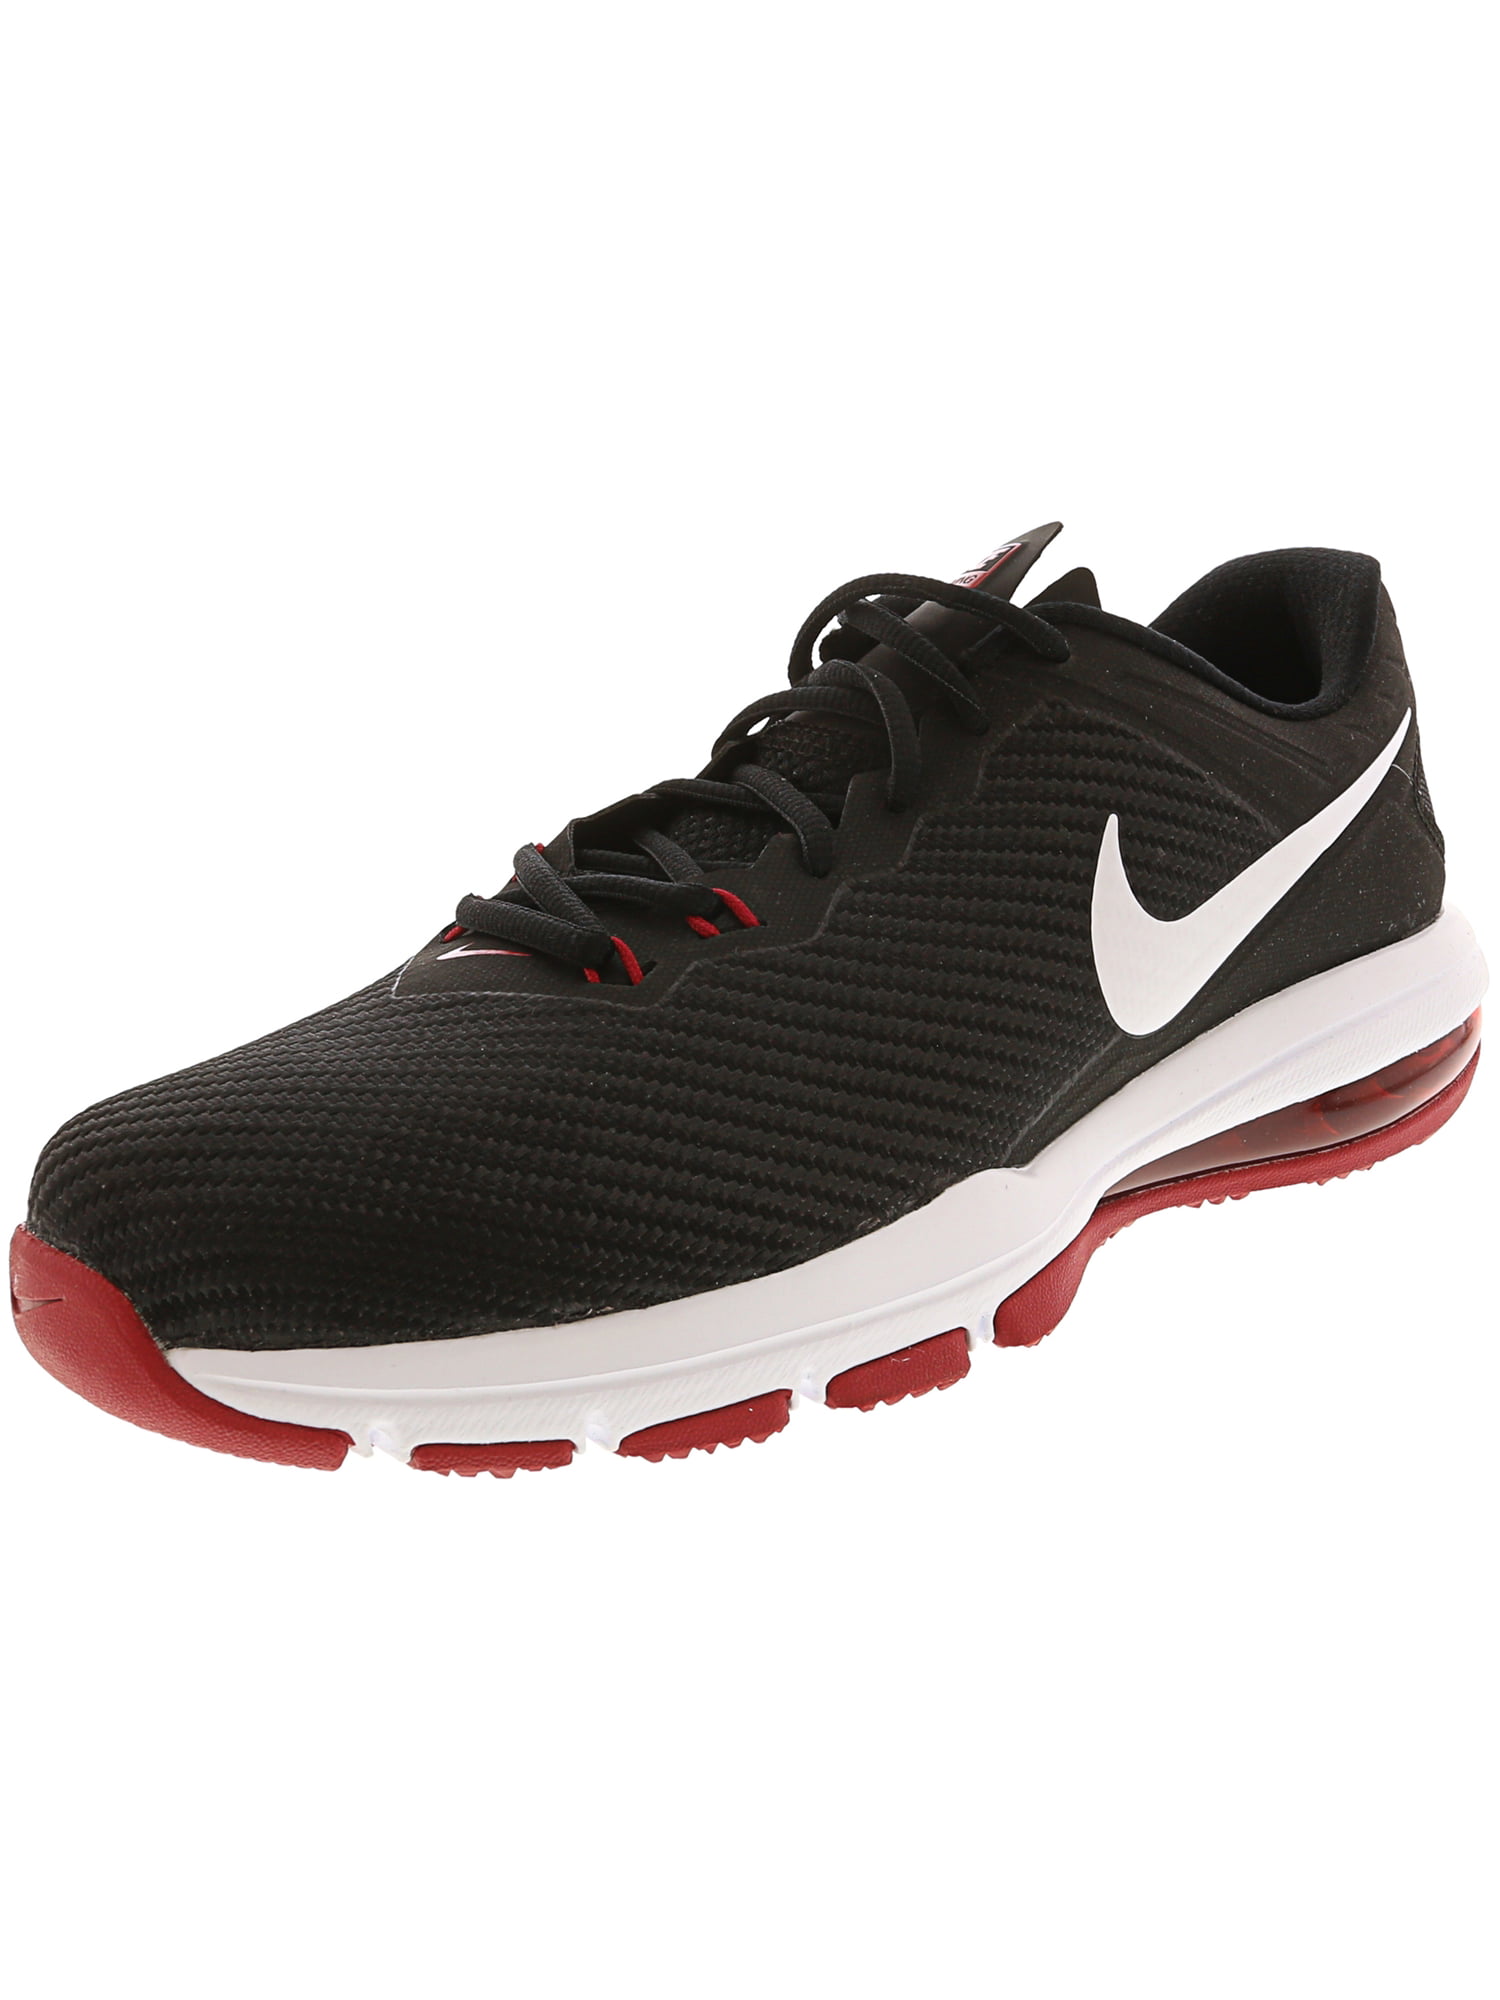 Nike Men's Air Max Full Ride Tr 1.5 Black / White - Red Ankle-High Fabric Training Shoes - Walmart.com